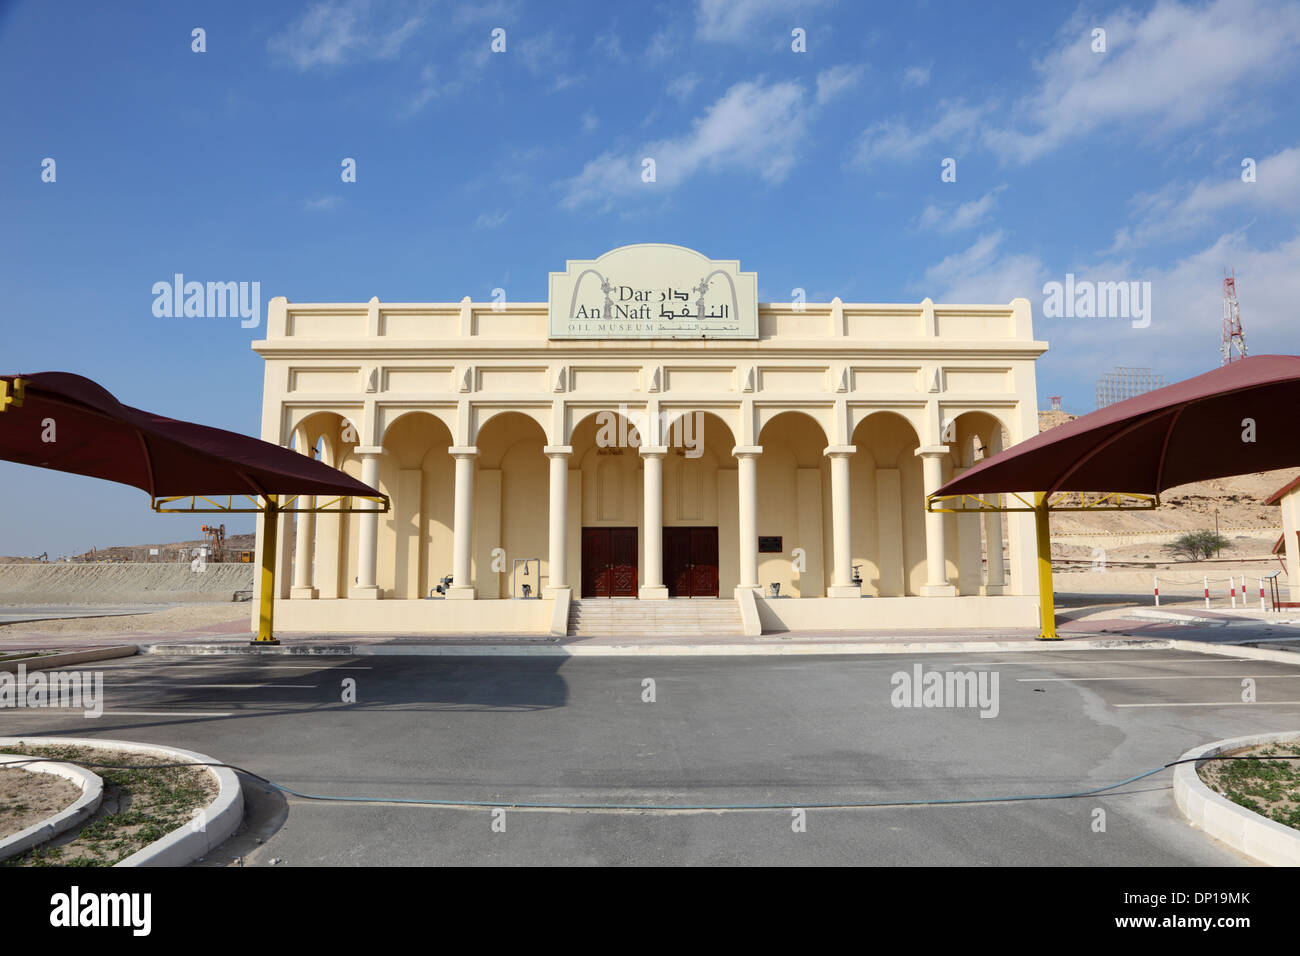 The First Oil Well Museum in Bahrain. Middle East Stock Photo